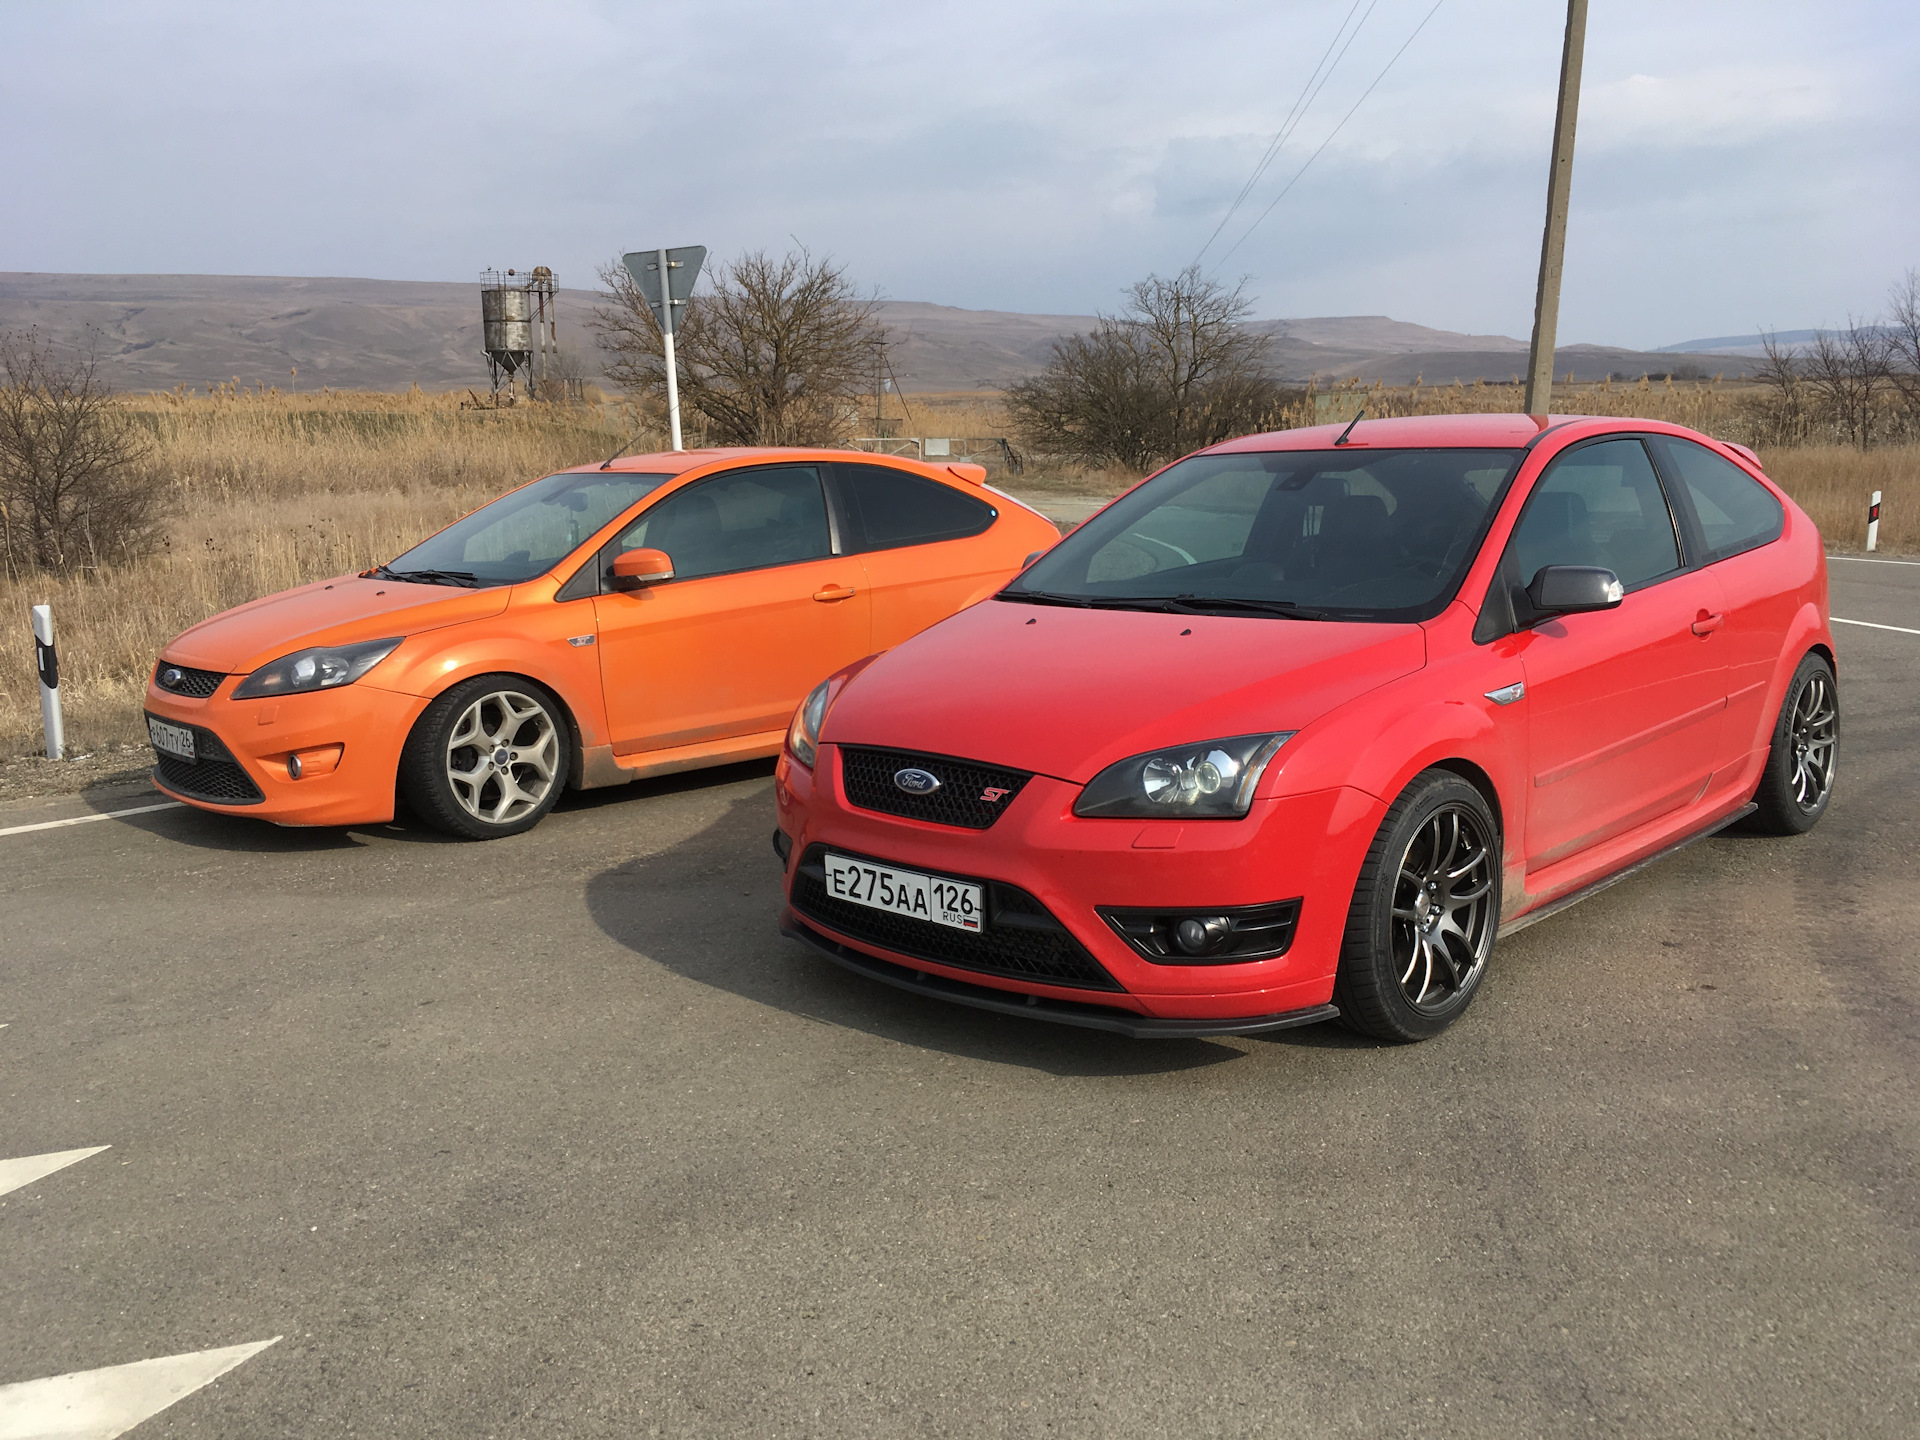 St 2 5 3. Ford St 2. Focus 2 St. Форд фокус мк2. Ford Focus St mk2 i.